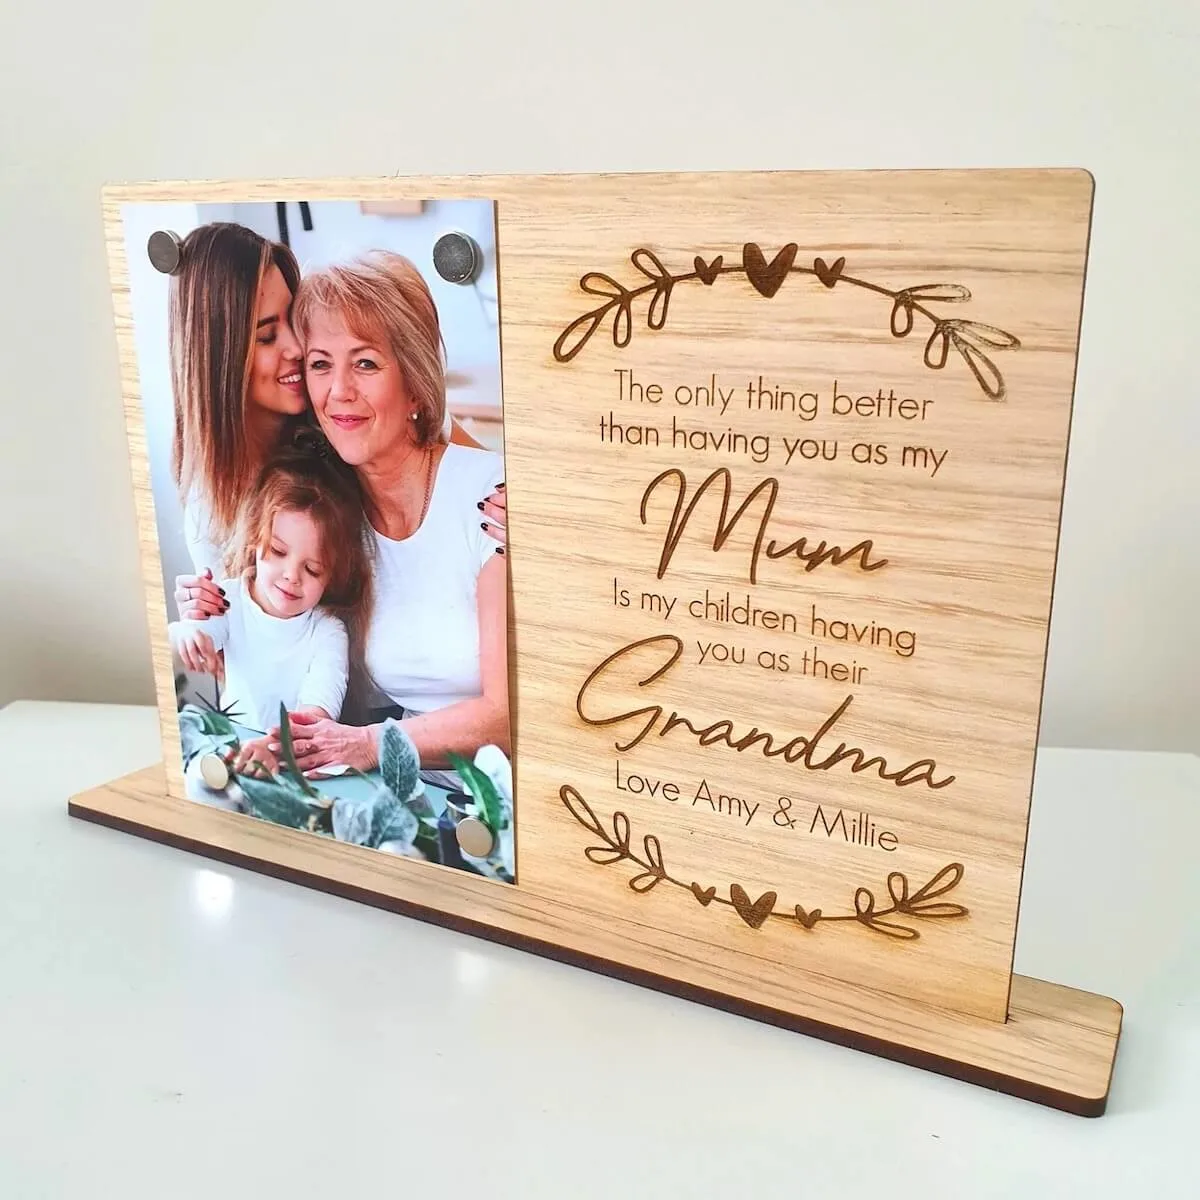 Mother's Day Gifts for Grandma - Unique Gift Ideas & More - The Expression  a Personalization Mall Blog